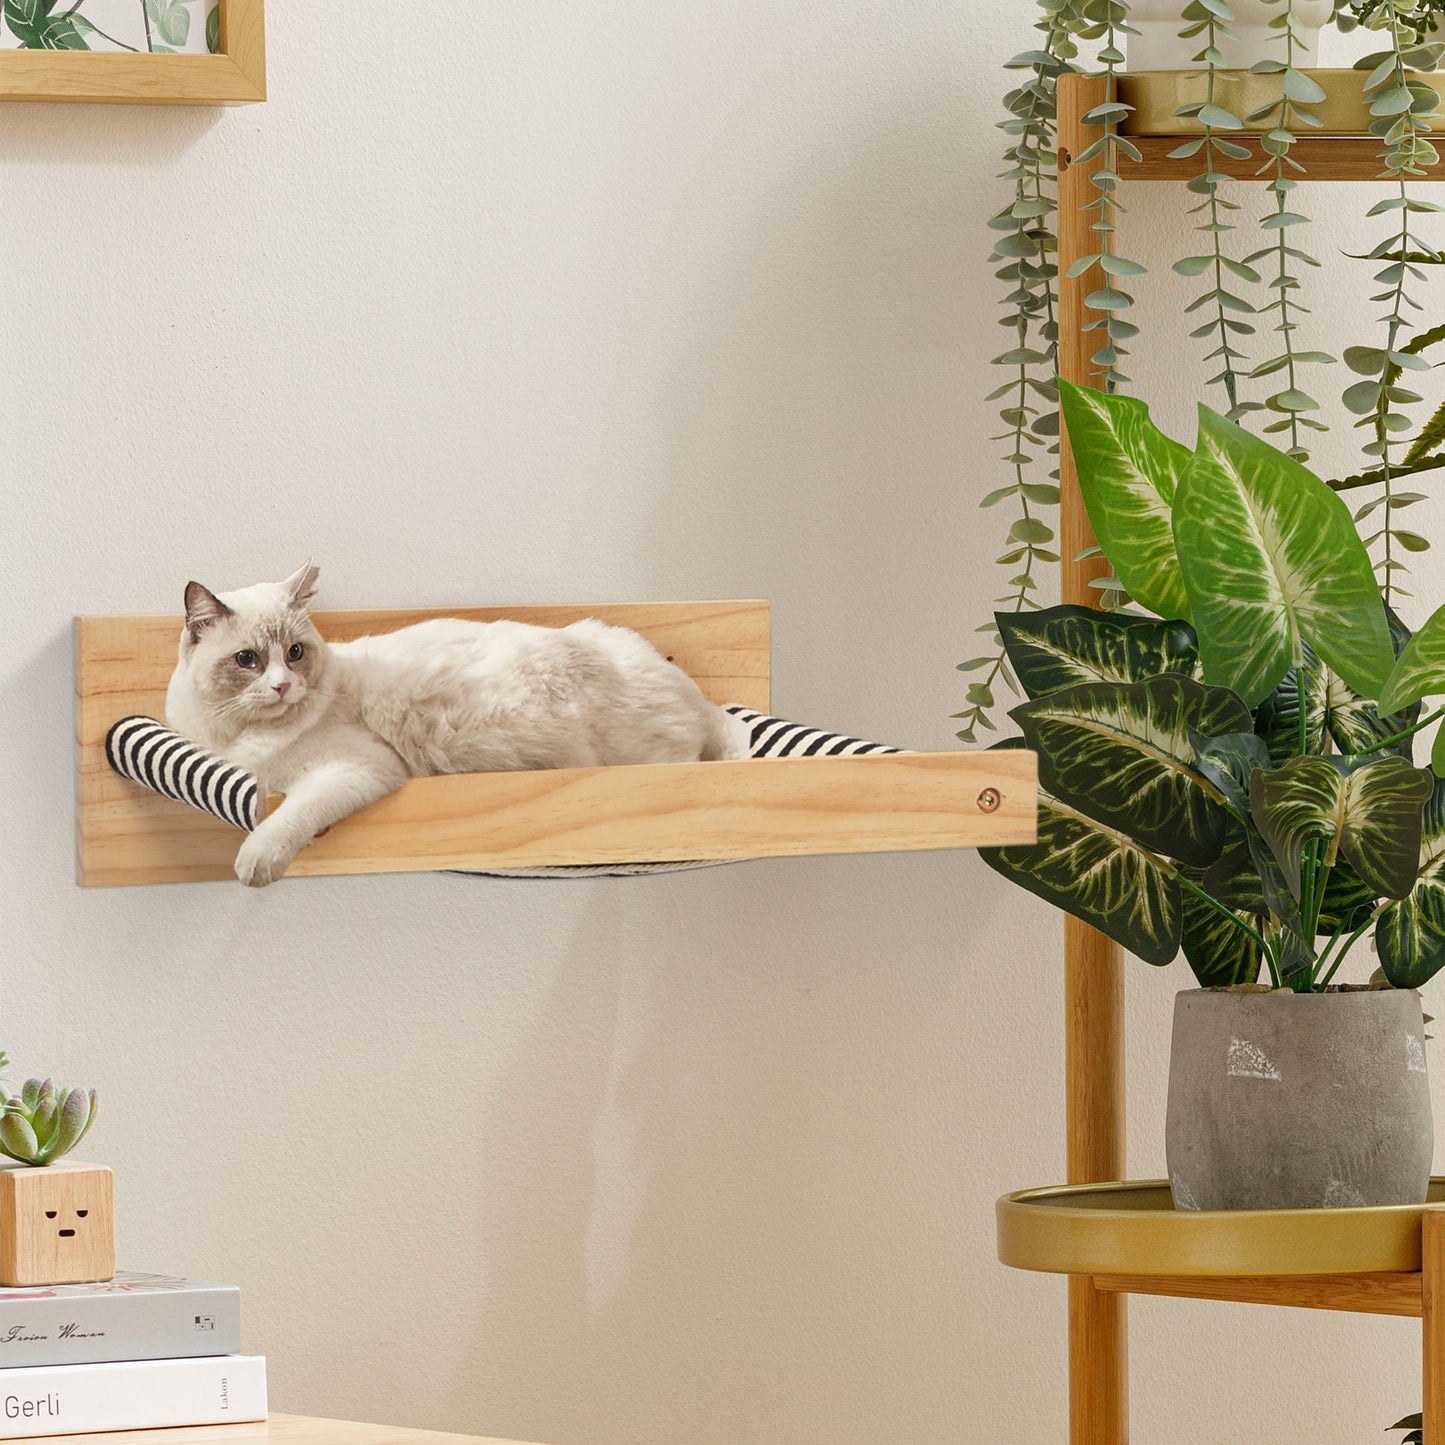 Wall-Mounted Cat Hammock, Cat Shelf and Perch for Wall, Cat Wall-Mounted Bed Furniture for Sleeping, Playing, Lounging, Natural XH